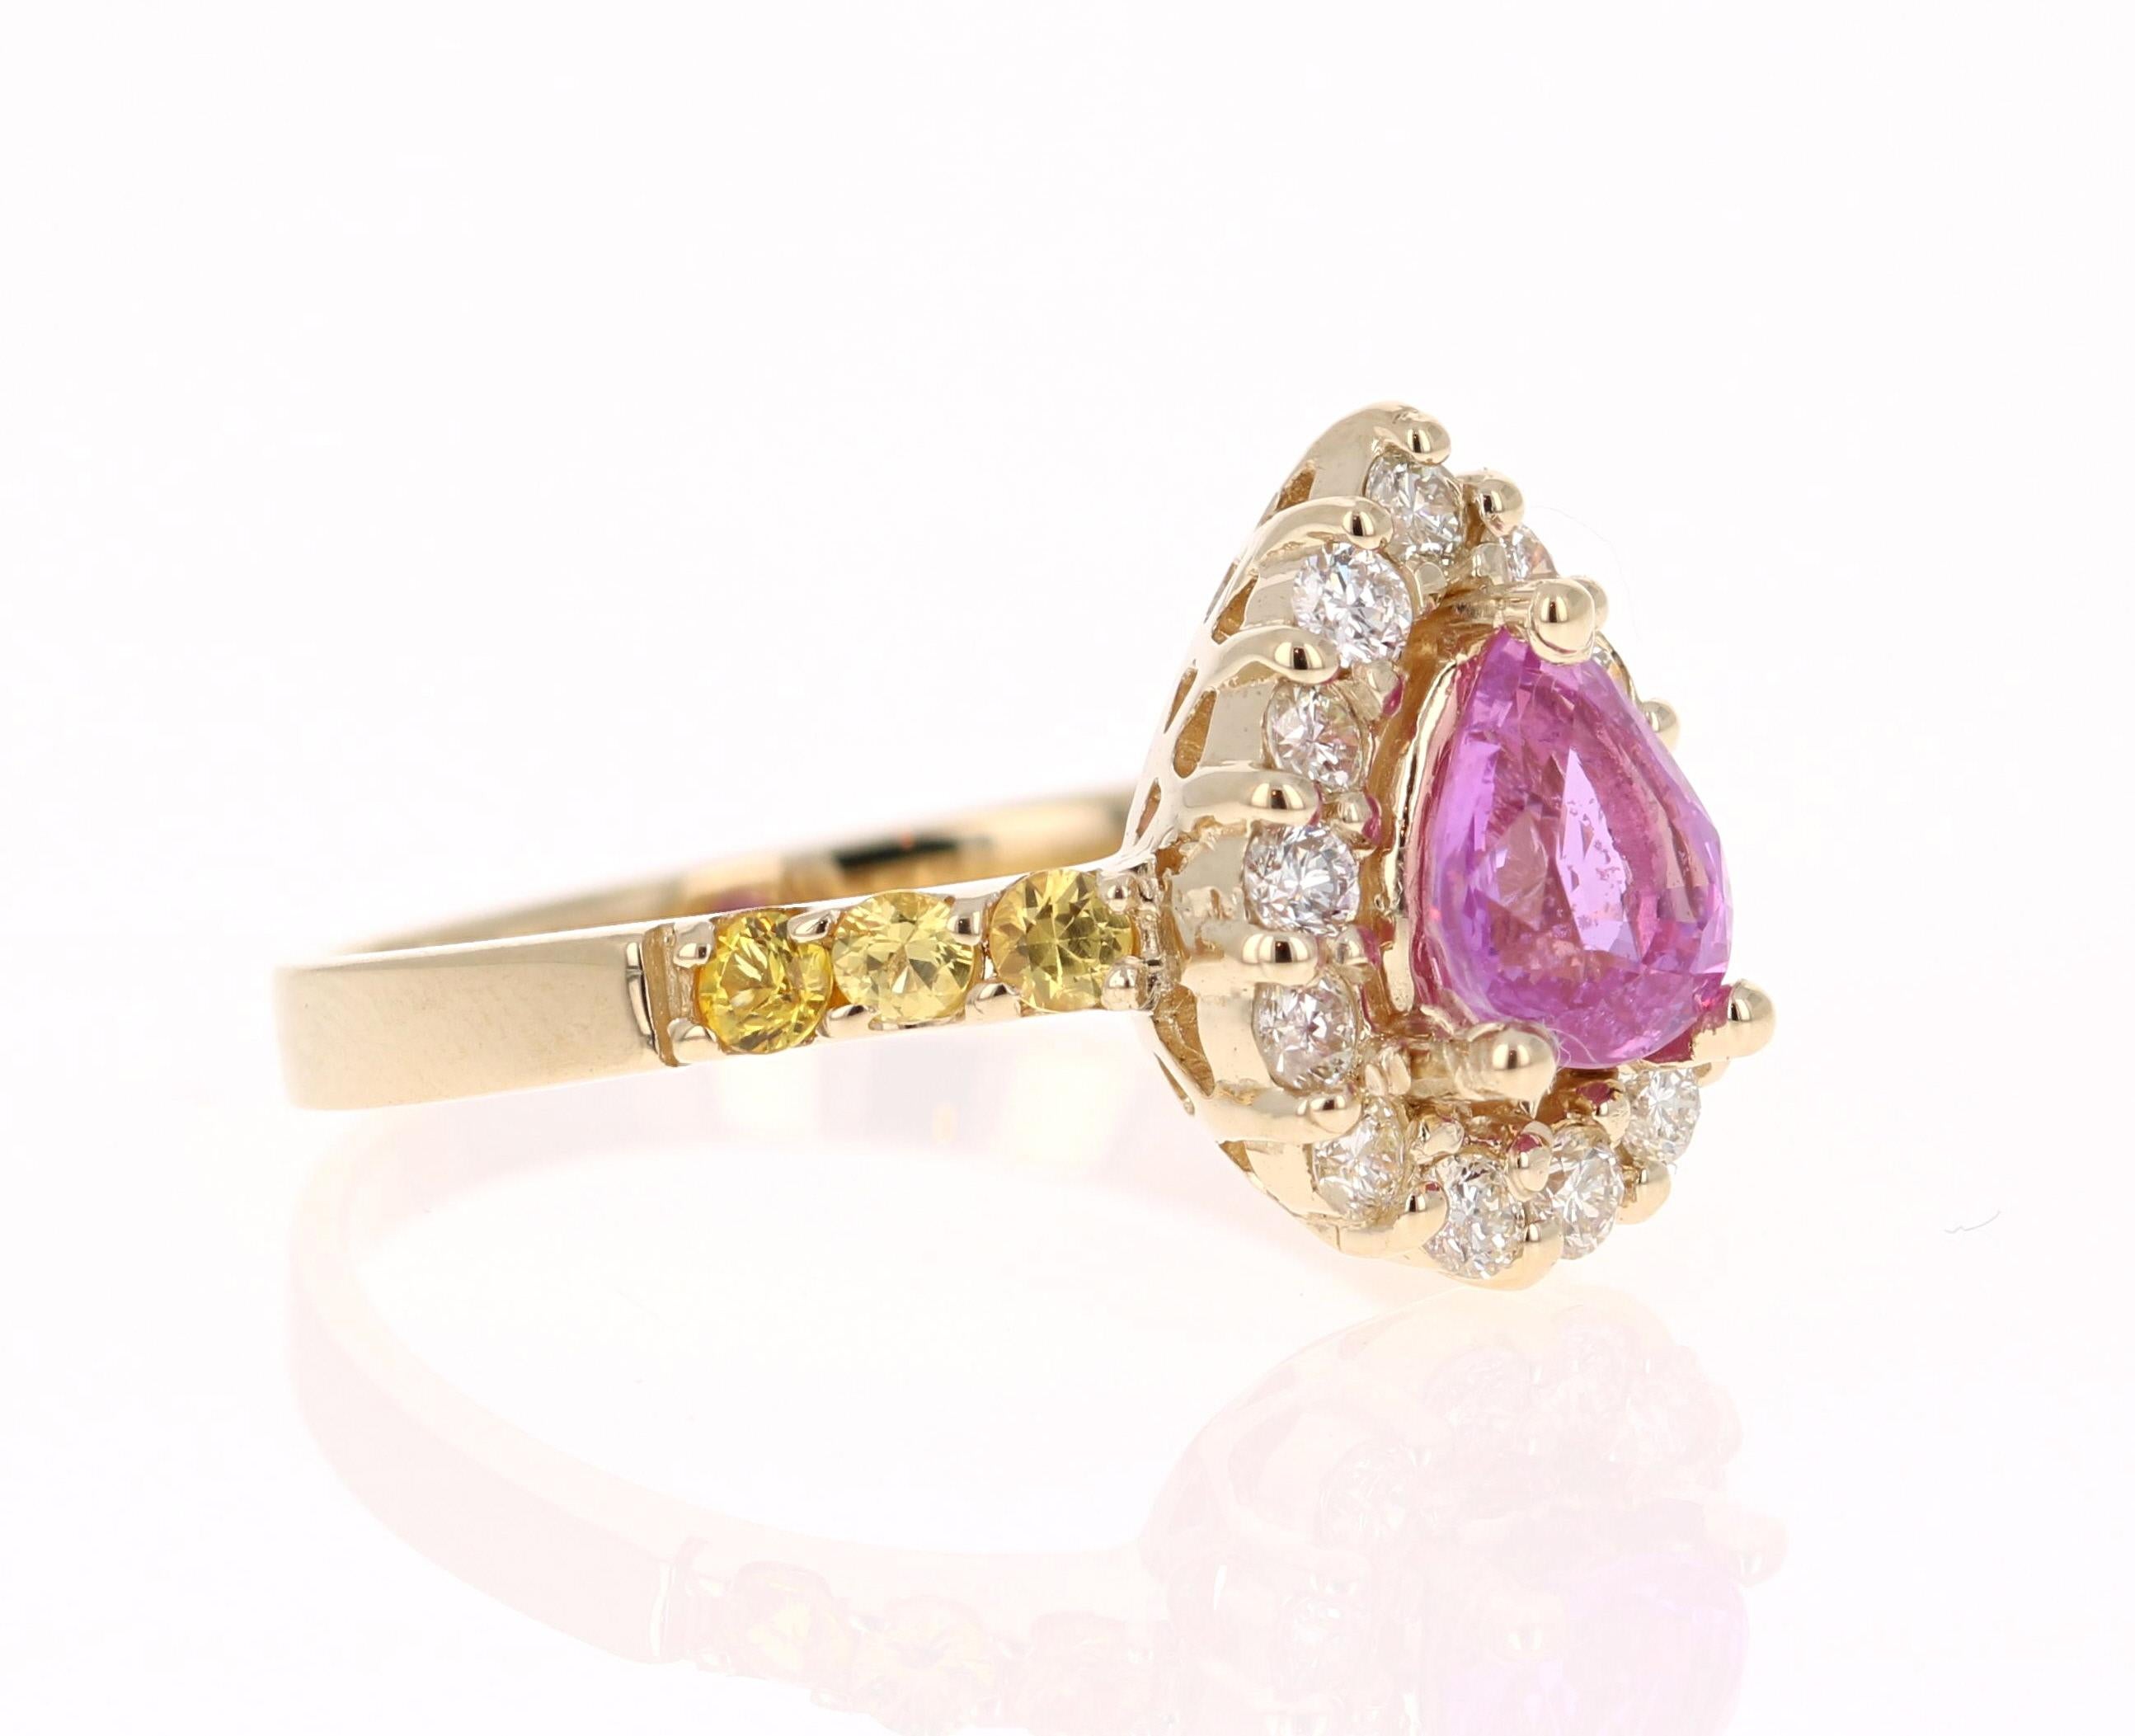 Cute Pink Sapphire and Diamond Ring! Can be an everyday ring or a unique Engagement Ring!

This beautiful ring has a Pear Cut Pink Sapphire that weights 1.11 Carats. 

The ring is embellished with 14 Round Cut Diamonds that weigh 0.41 Carats with a